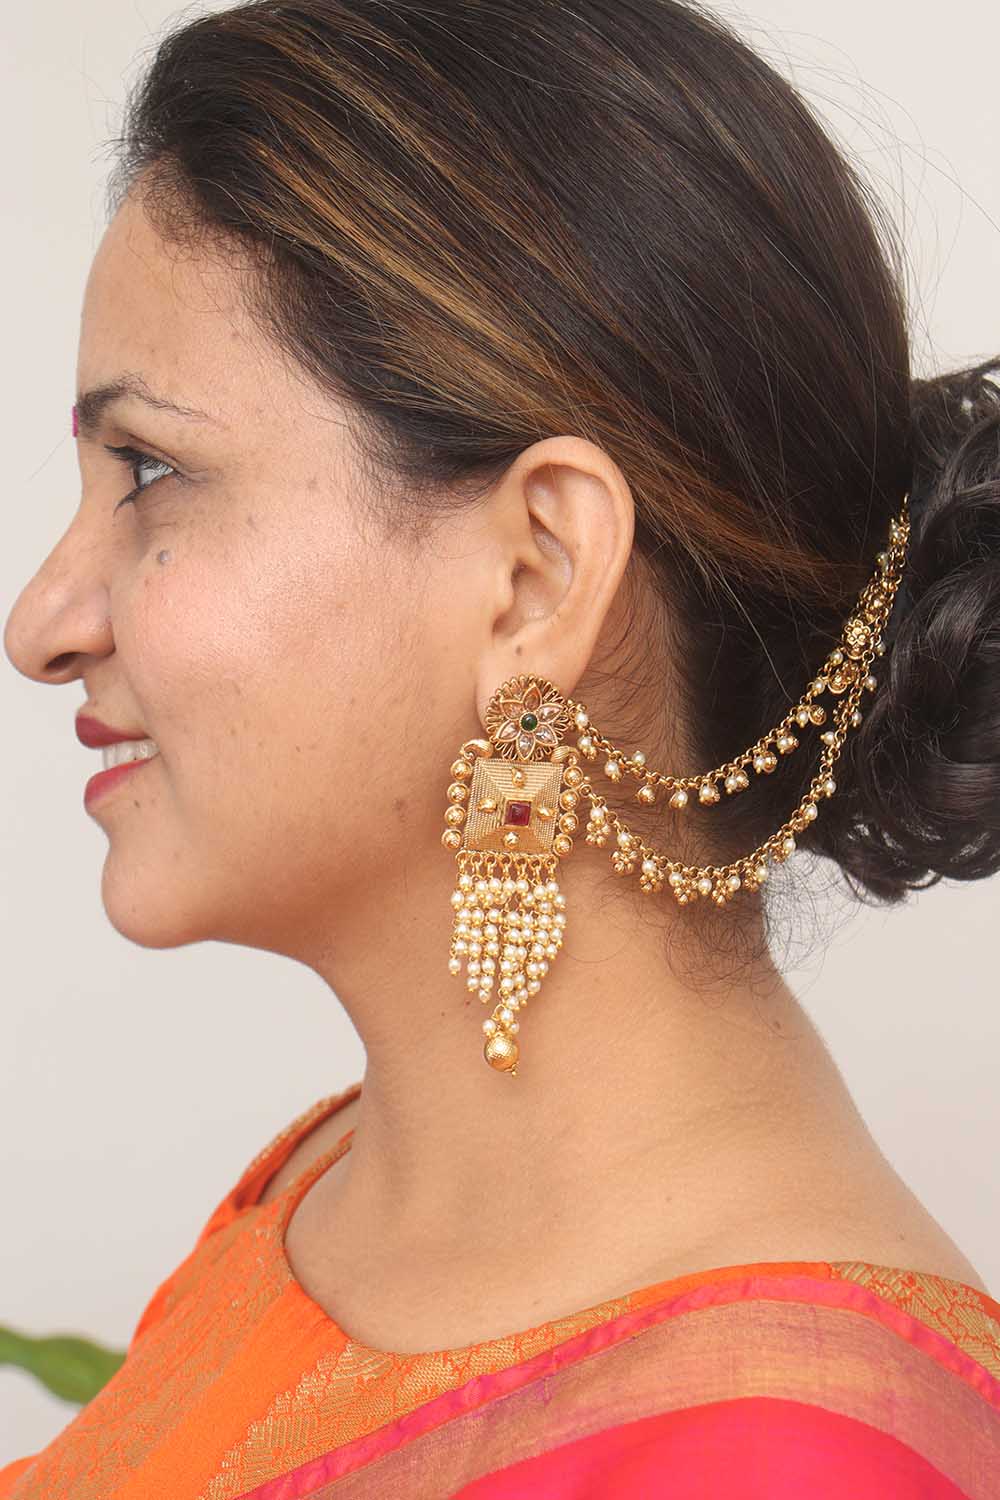 Work It 12 Earrings With Hair Chain Looks For Awesome Bridal Pics